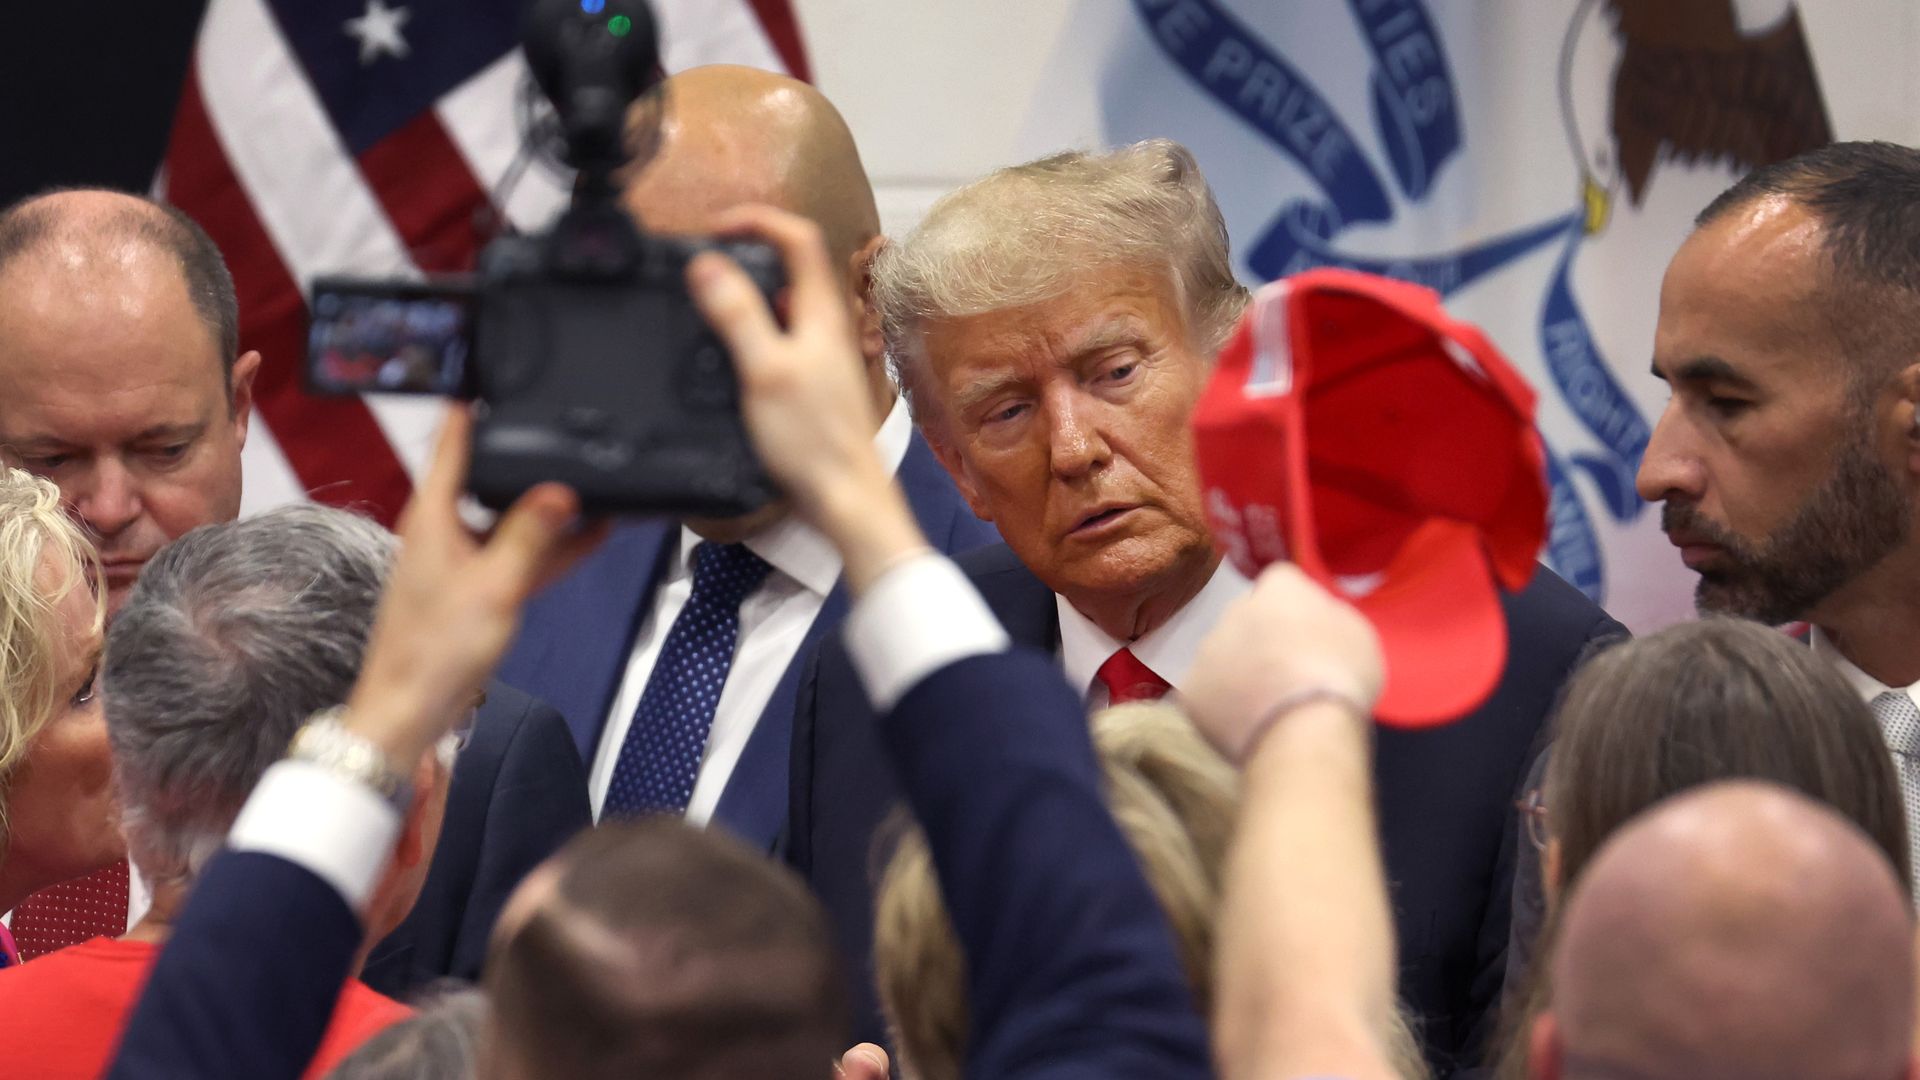 Former President Trump behind a crowd in Iowa.  A photographer holds up a camera and someone else waves a red hat. 